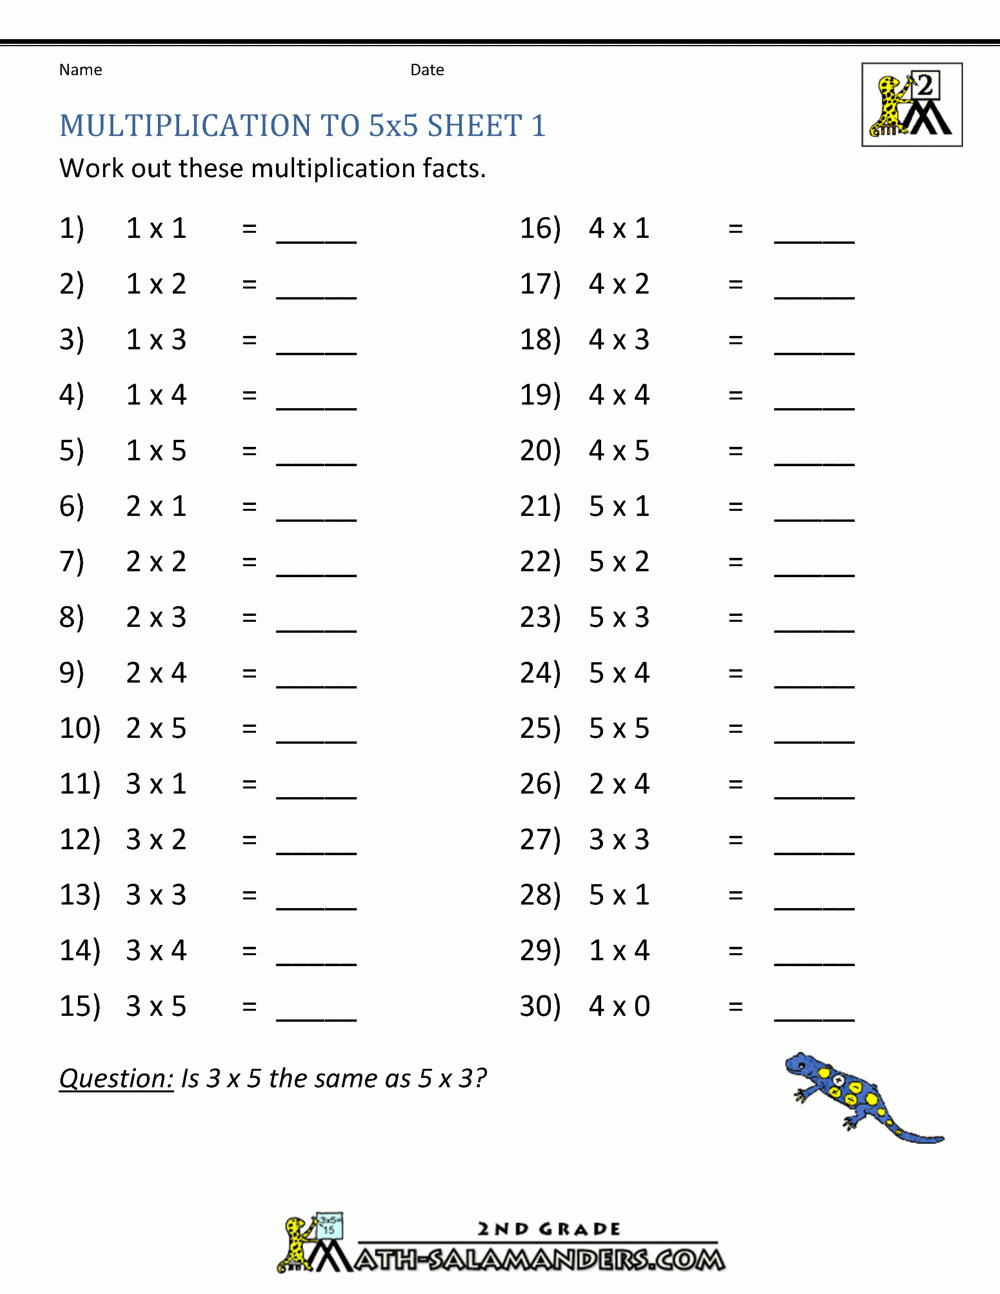 division-tables-1-12-practice-sheet-times-tables-worksheets-printable